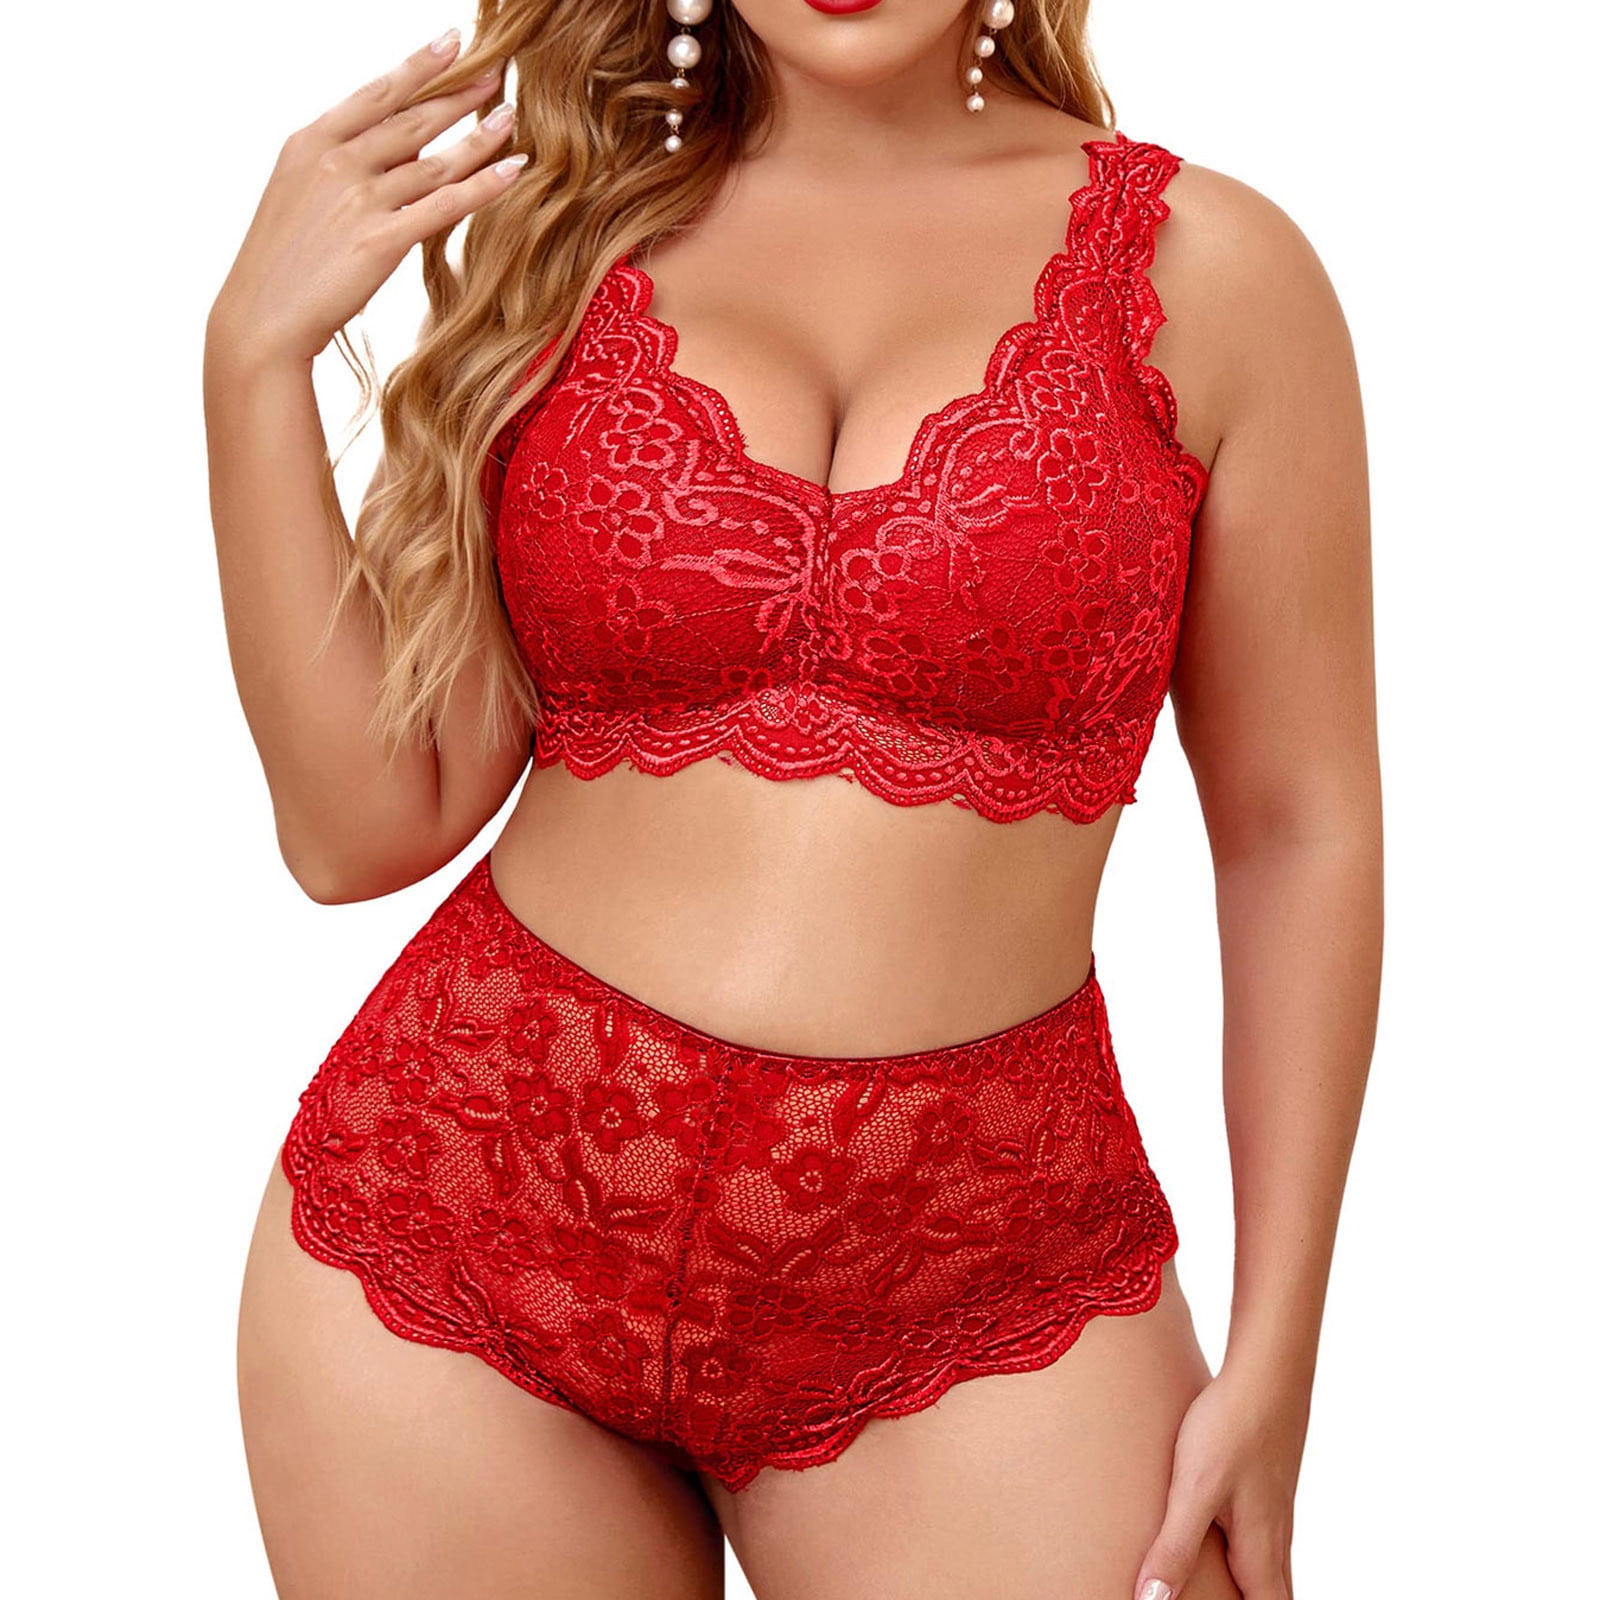 Zuwimk Lingerie Sets For Women ,Women Ruffle 2 Piece Lace Lingerie Set,Underwire  Ribbed Bra and Panty Sets Valentine Red,XXL 